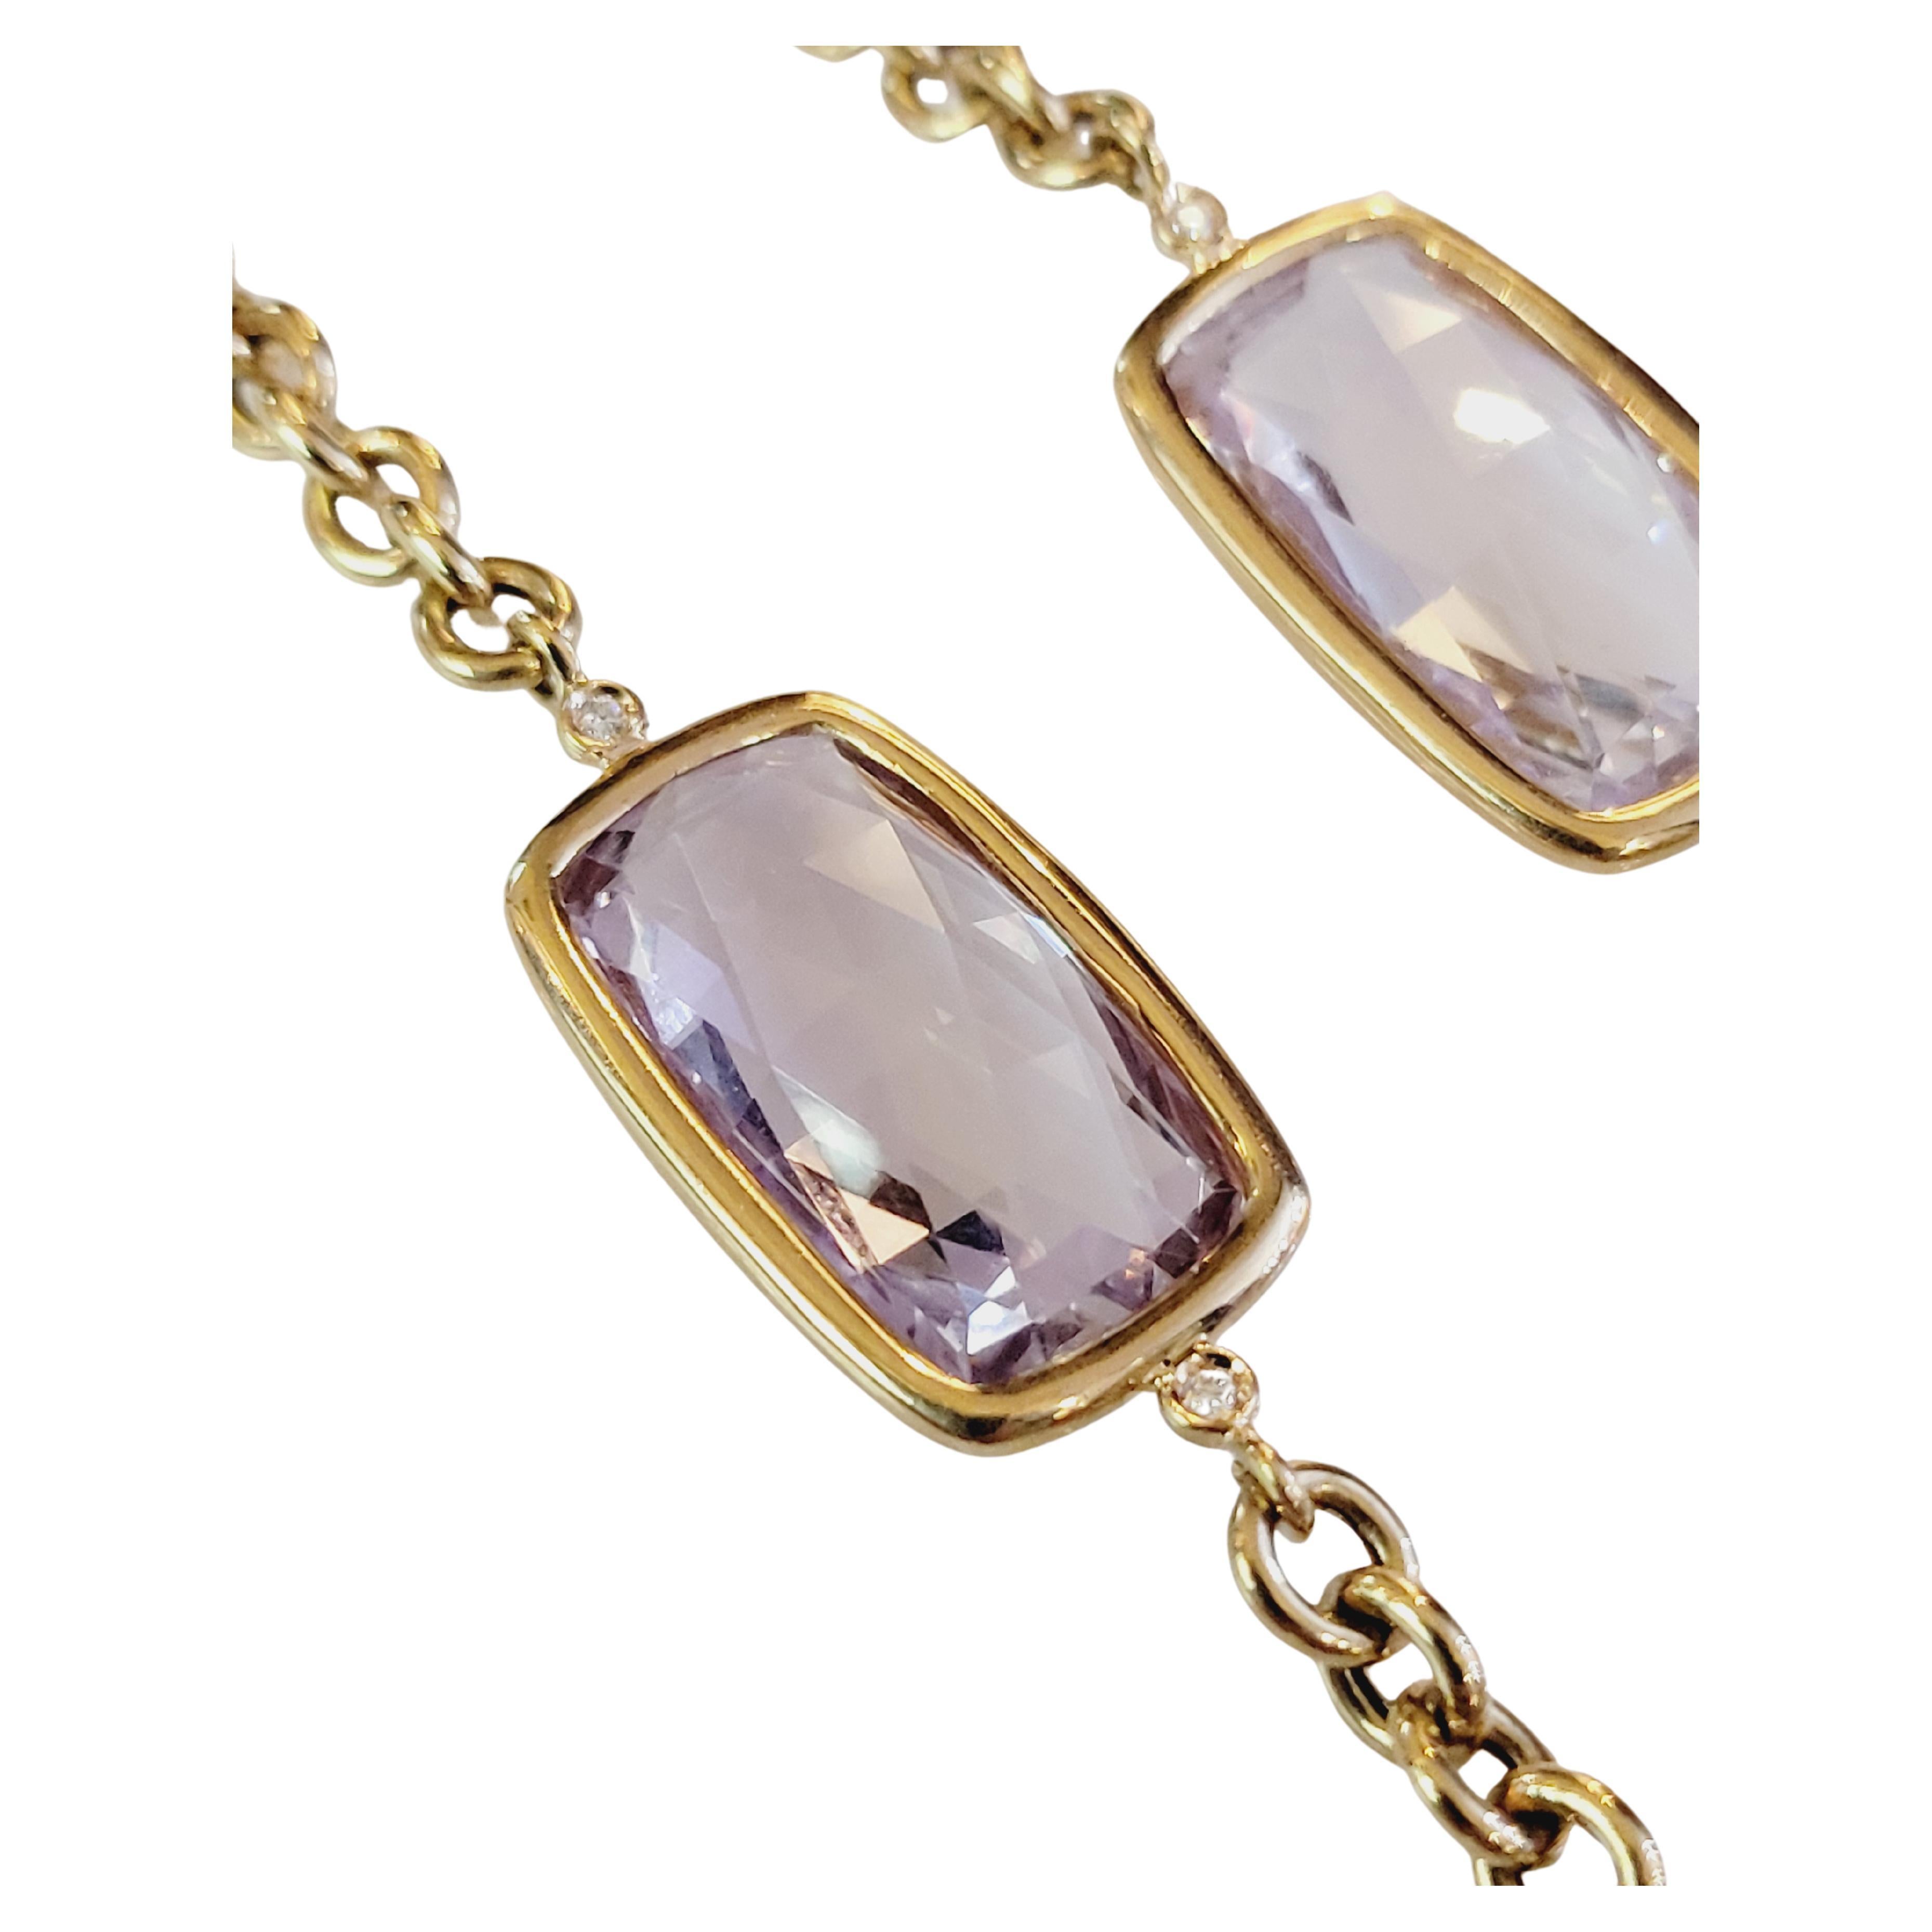 A & Furst. 18K Amethyst Chain For Sale